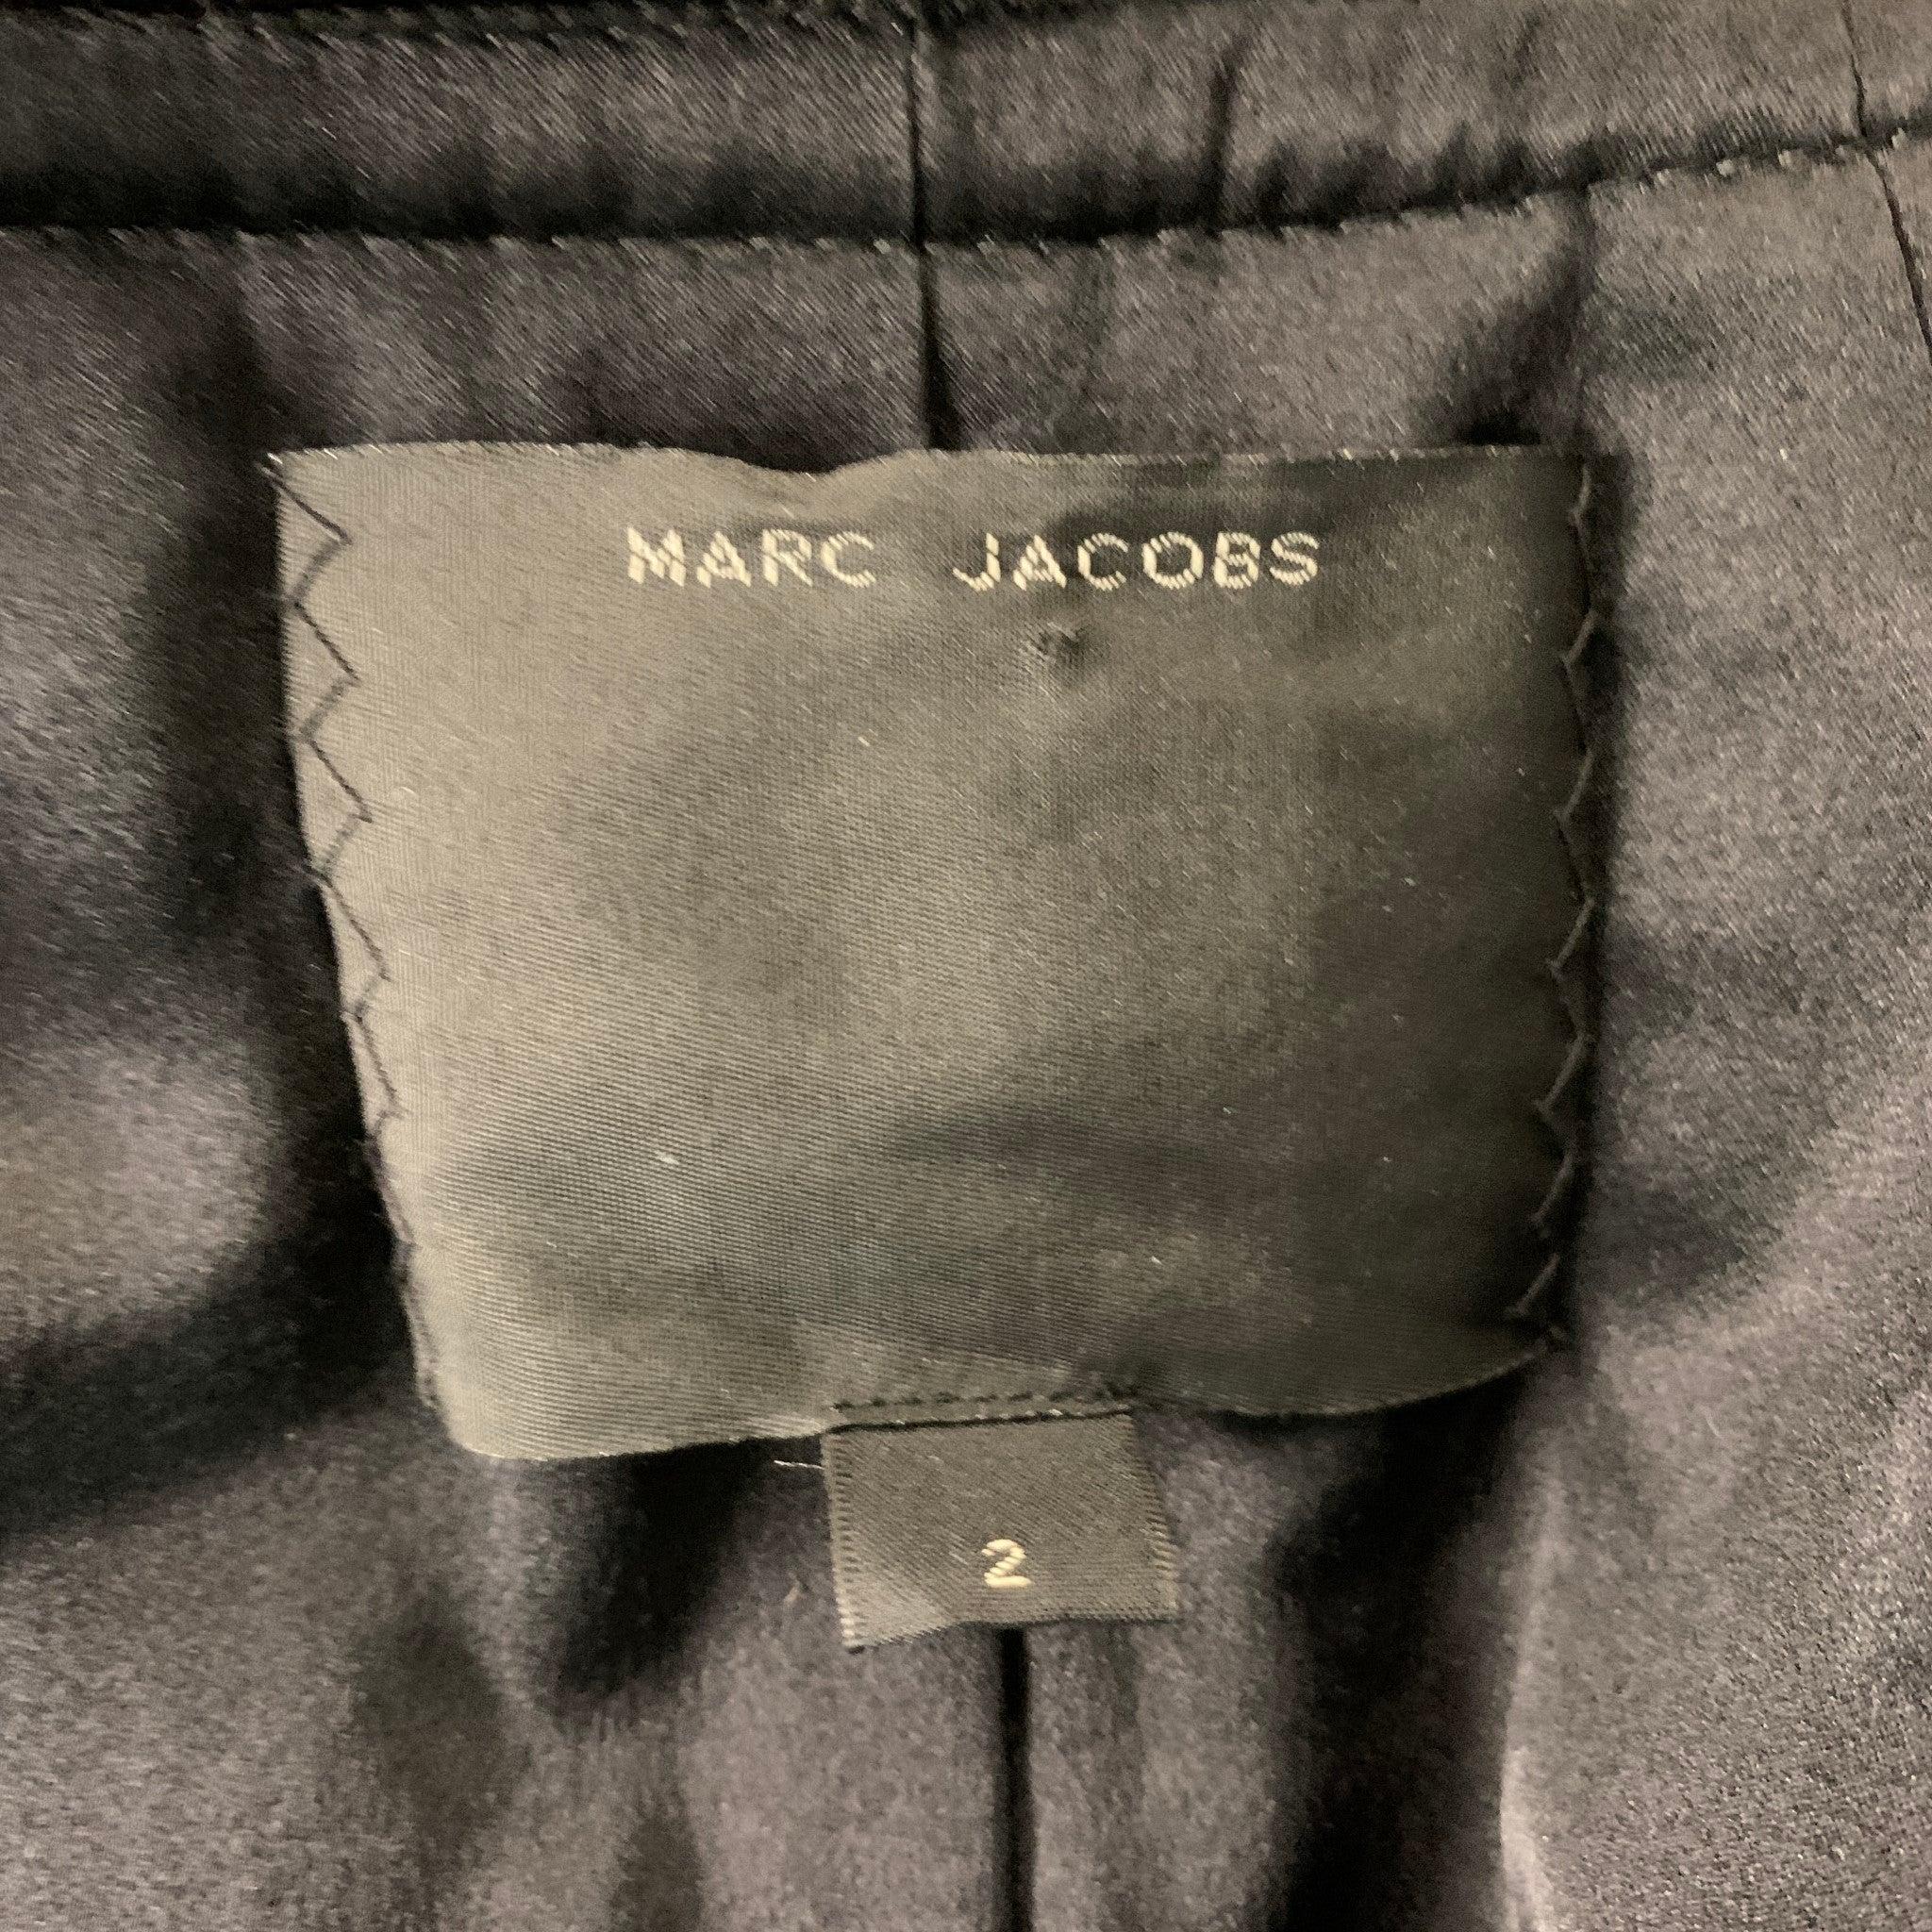 Women's MARC JACOBS Size 2 Black, White and Green Wool & Modal Jacket